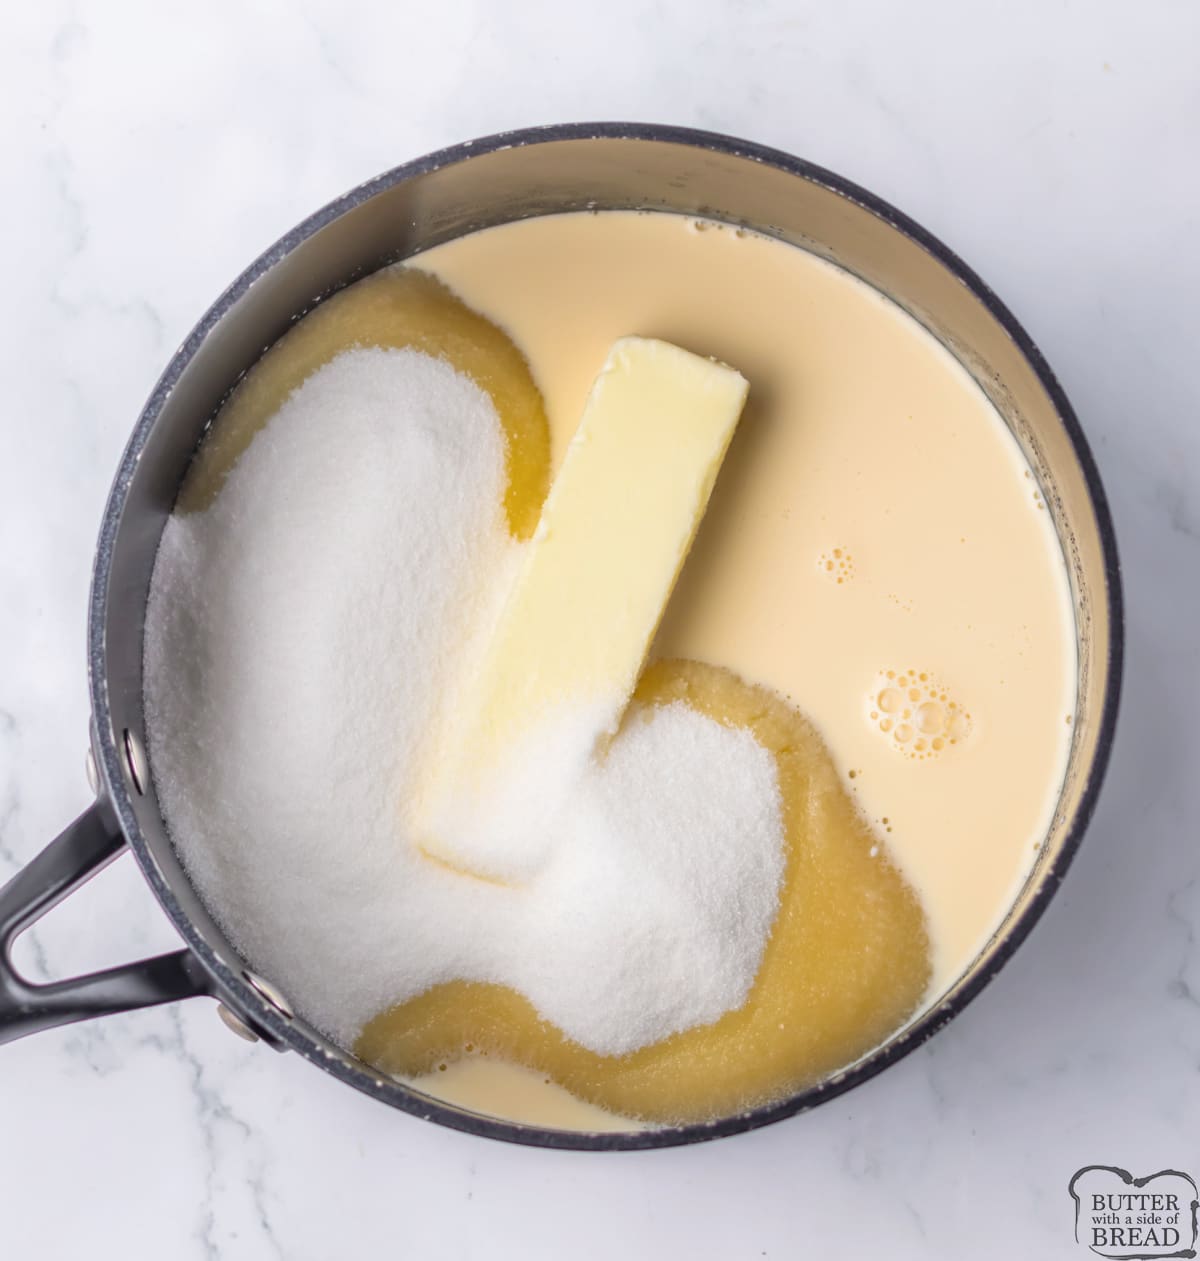 Mix sugar, butter and evaporated milk in saucepan. 